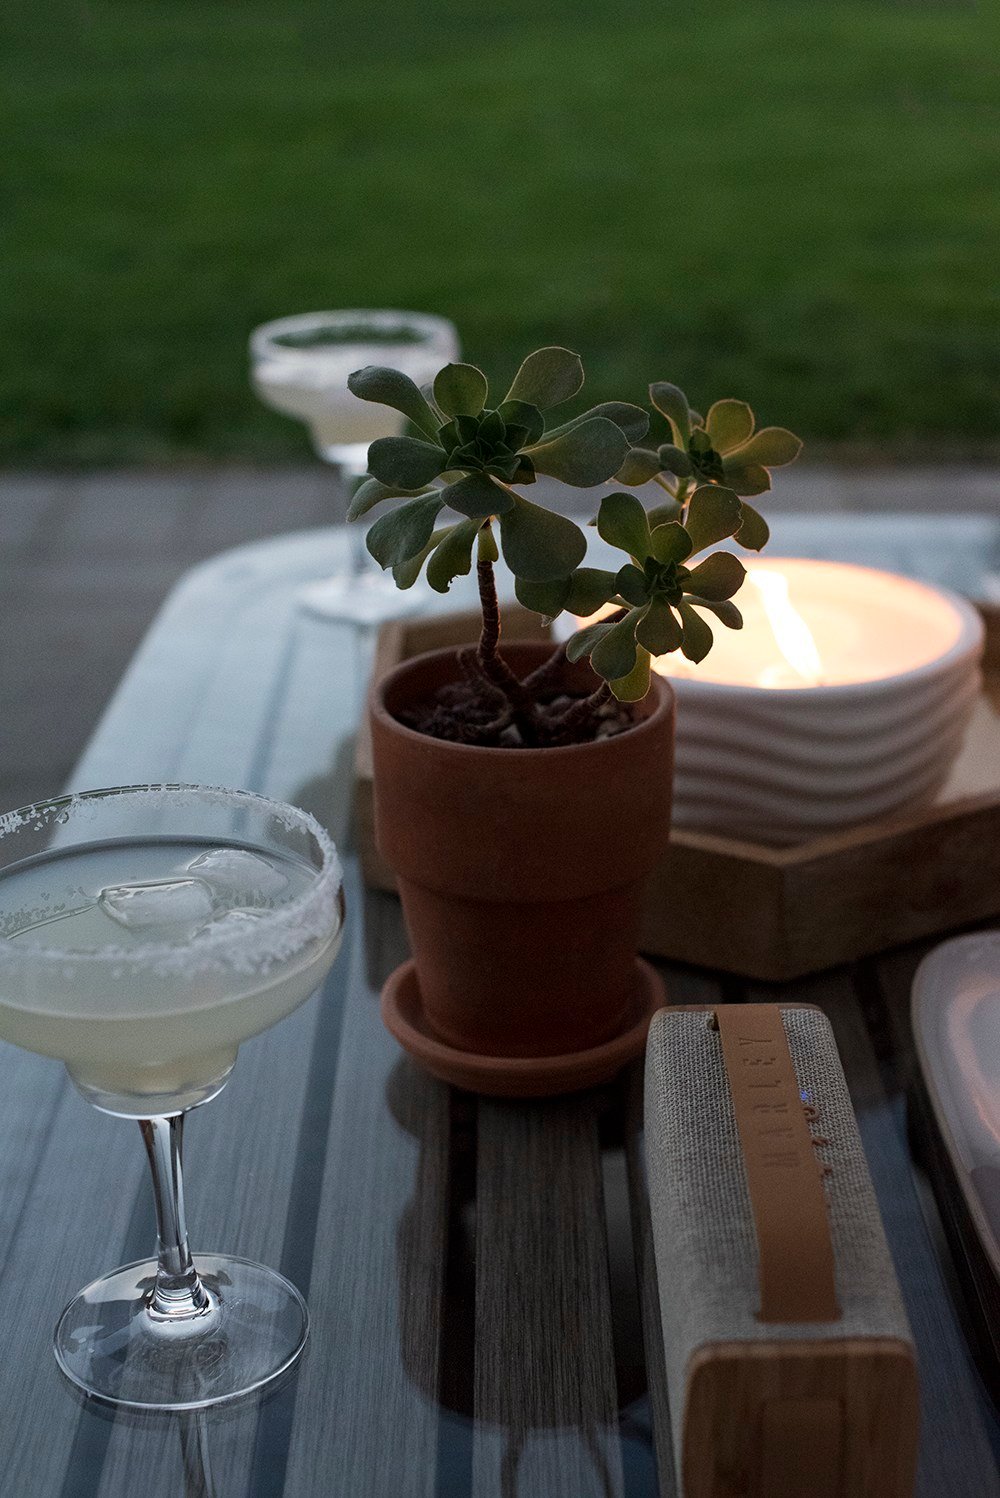 Date Night : Al Fresco Dining At Home - roomfortuesday.com